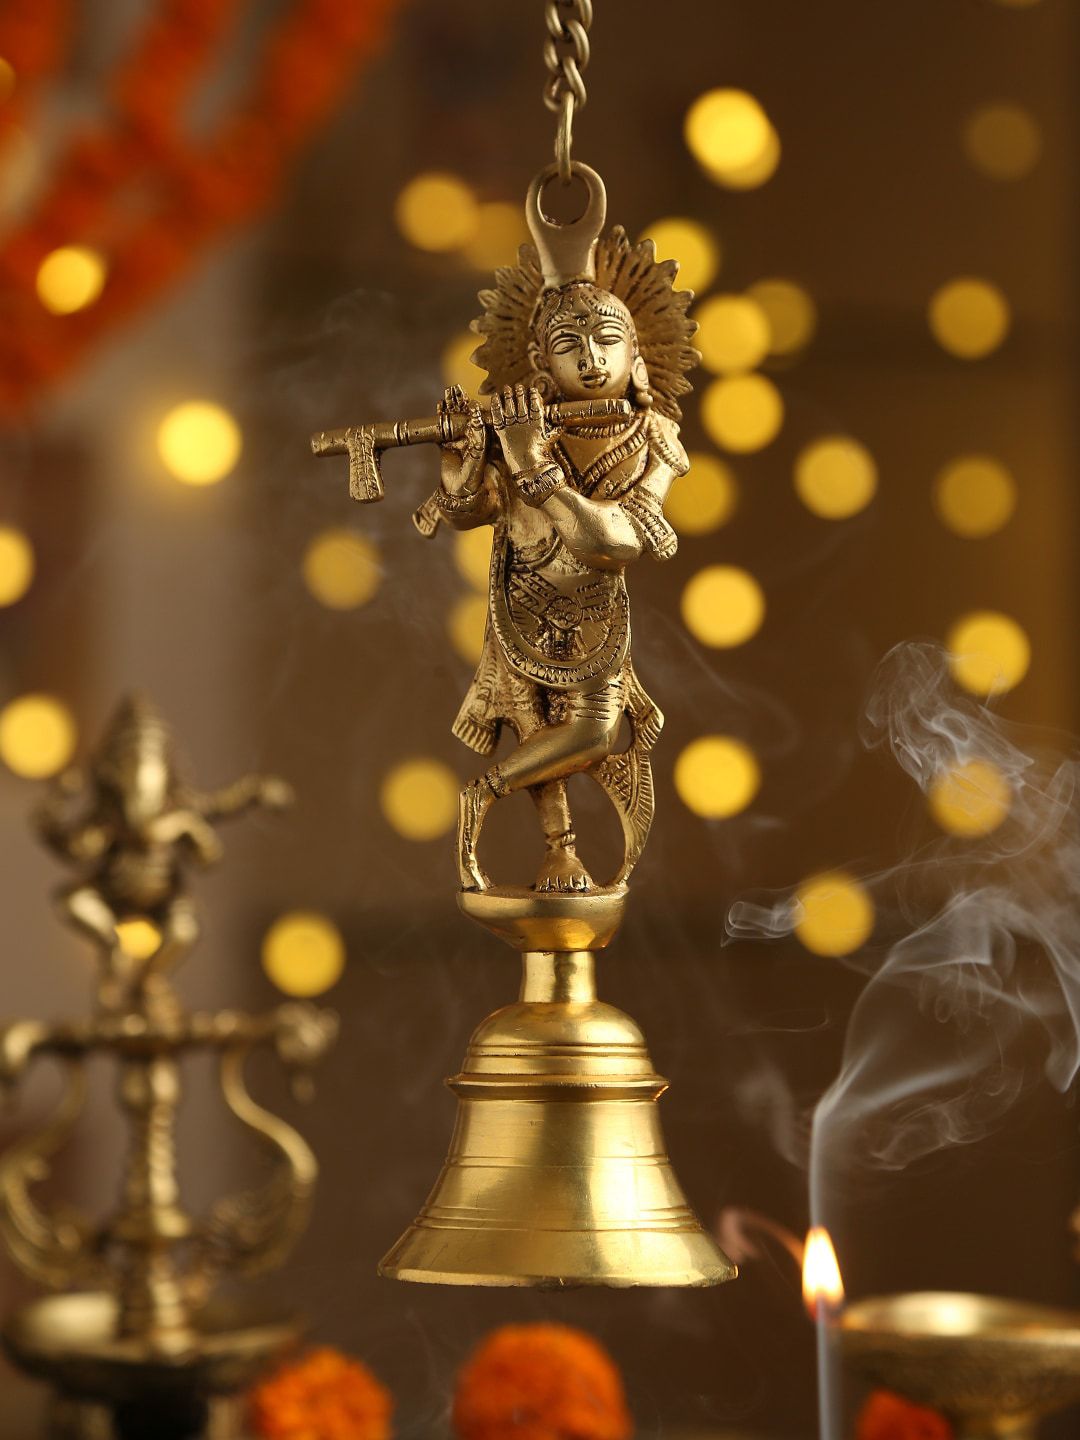 Amoliconcepts
Gold-Toned 'Krishna' Hand-Etched  Hanging Bell Price in India